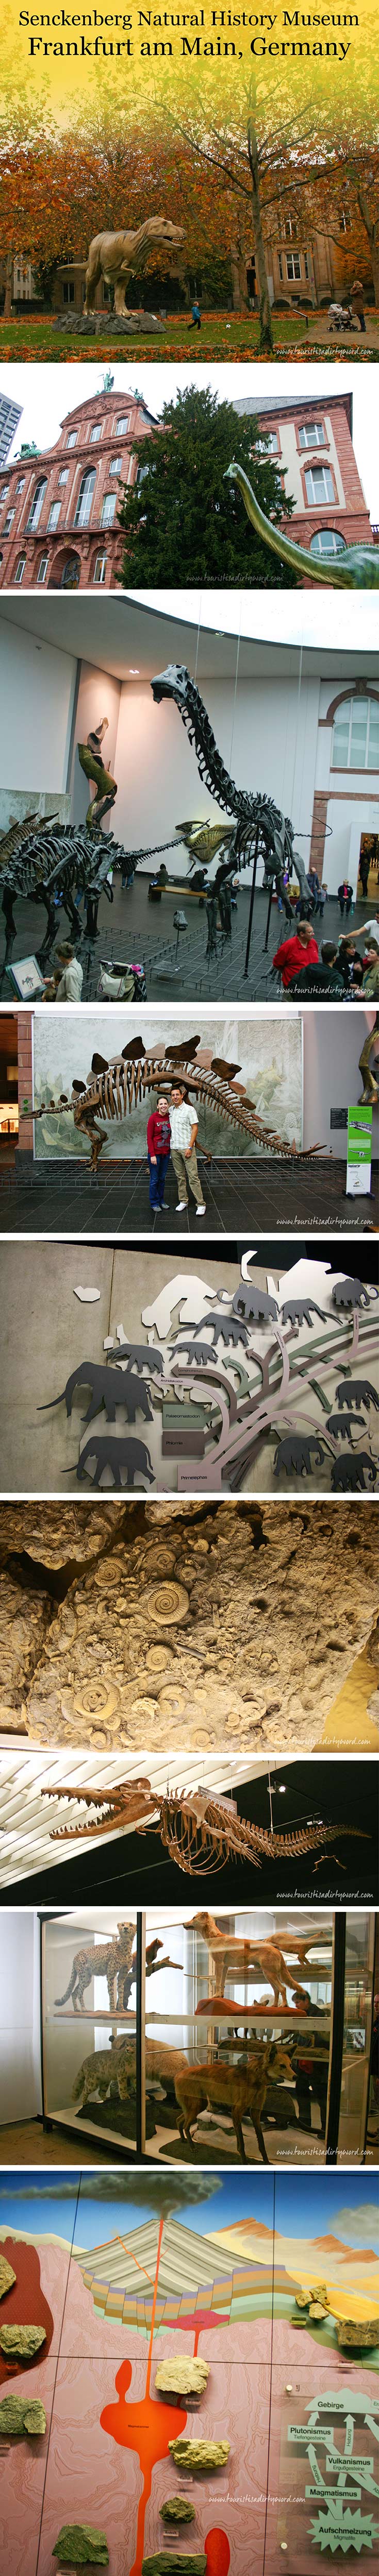 Senckenberg Natural History Museum Overview Guide with Photos • Germany Travel